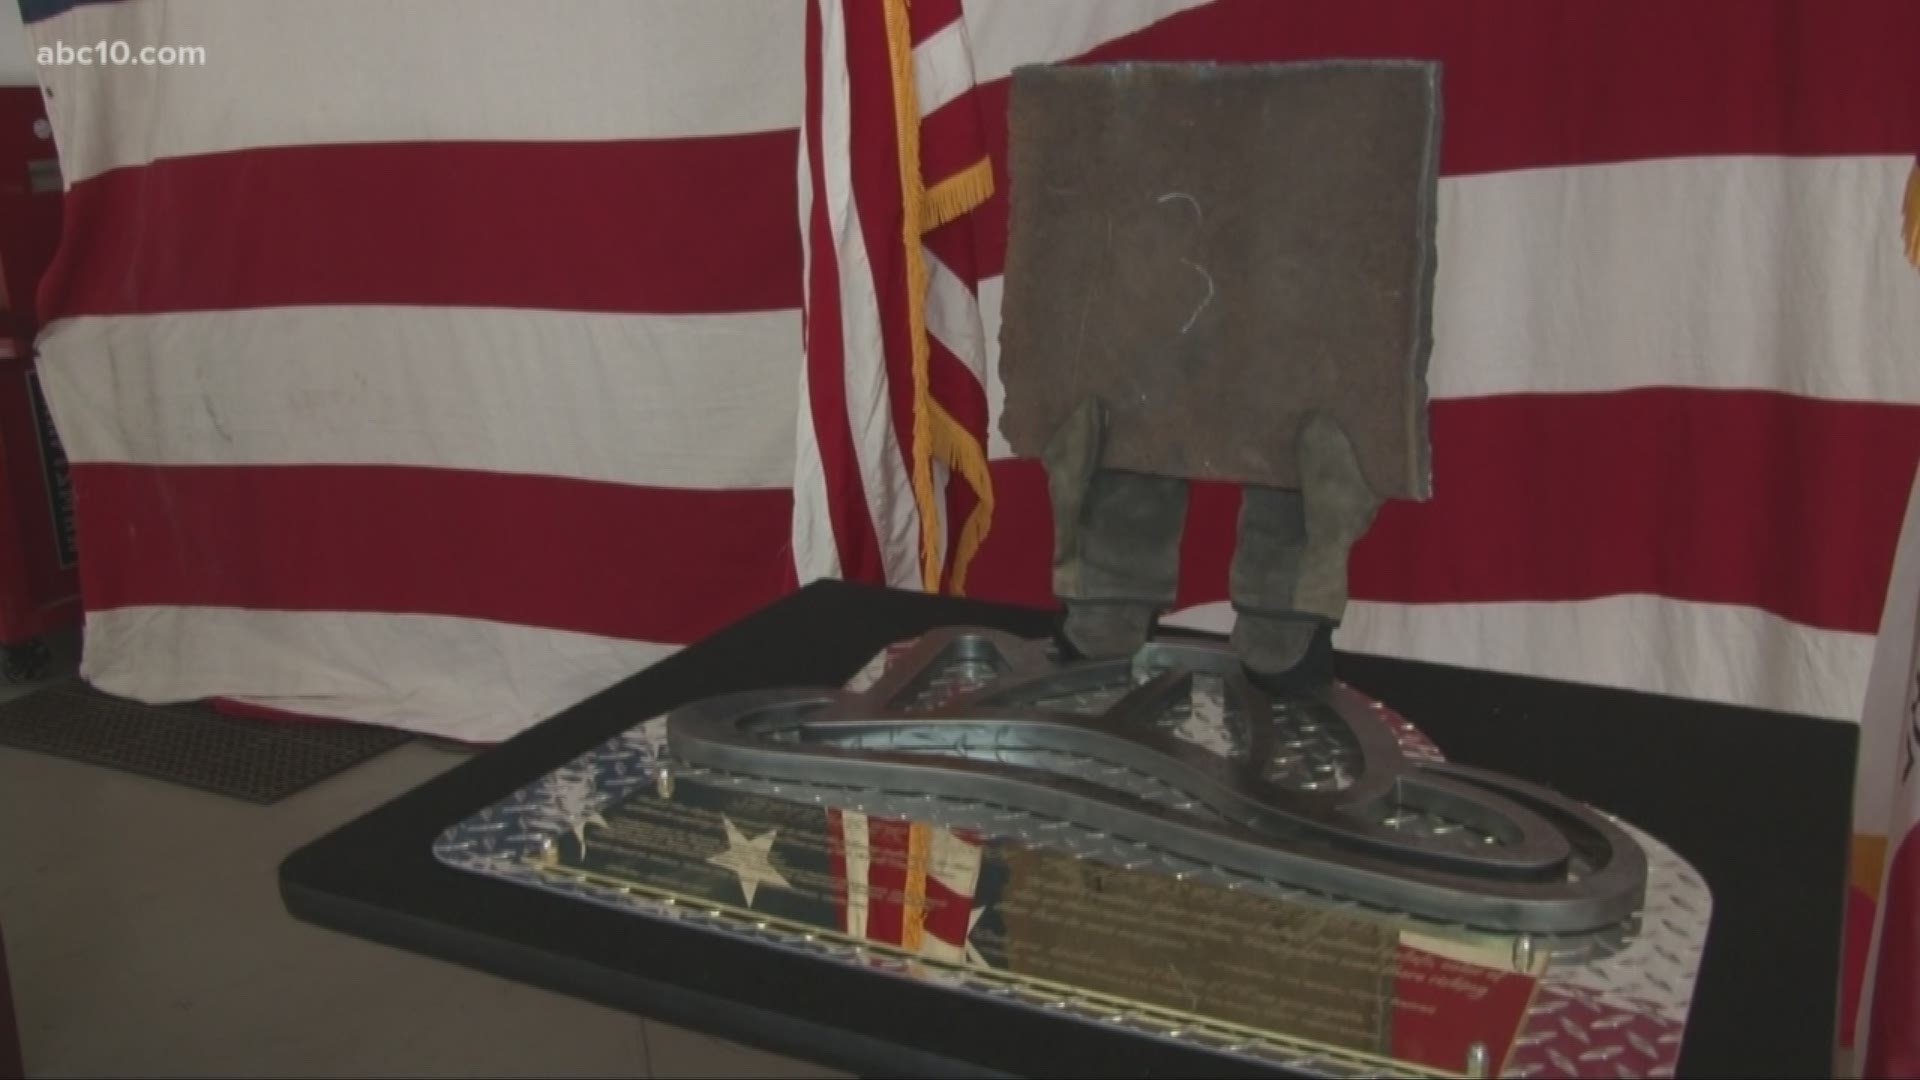 The Turlock Fire Department unveiled a piece of history during their Sept. 11 ceremony.